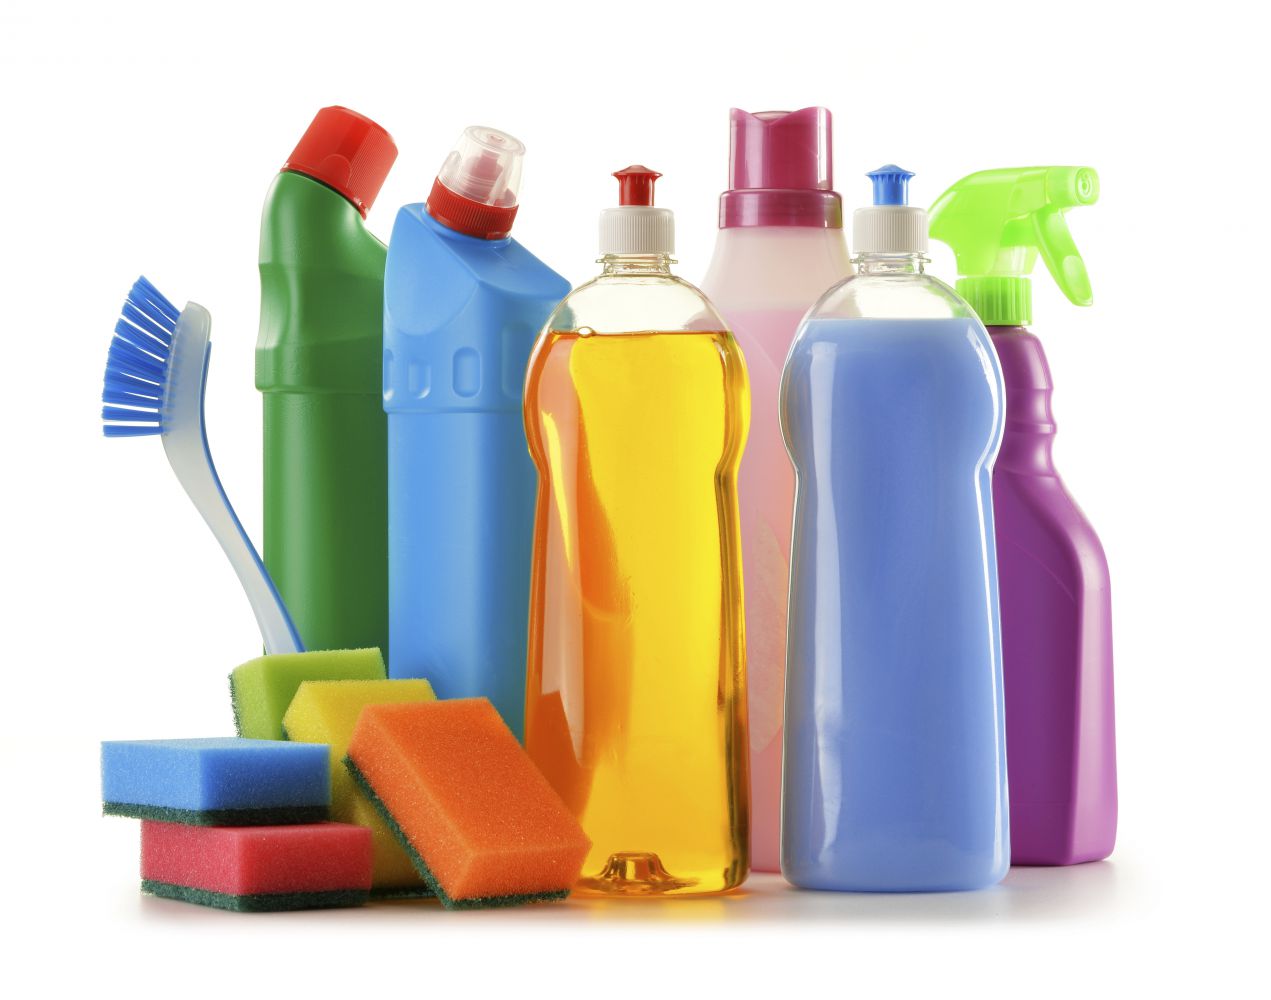 The most important information about the packaging machines for disinfectant and floor cleaner